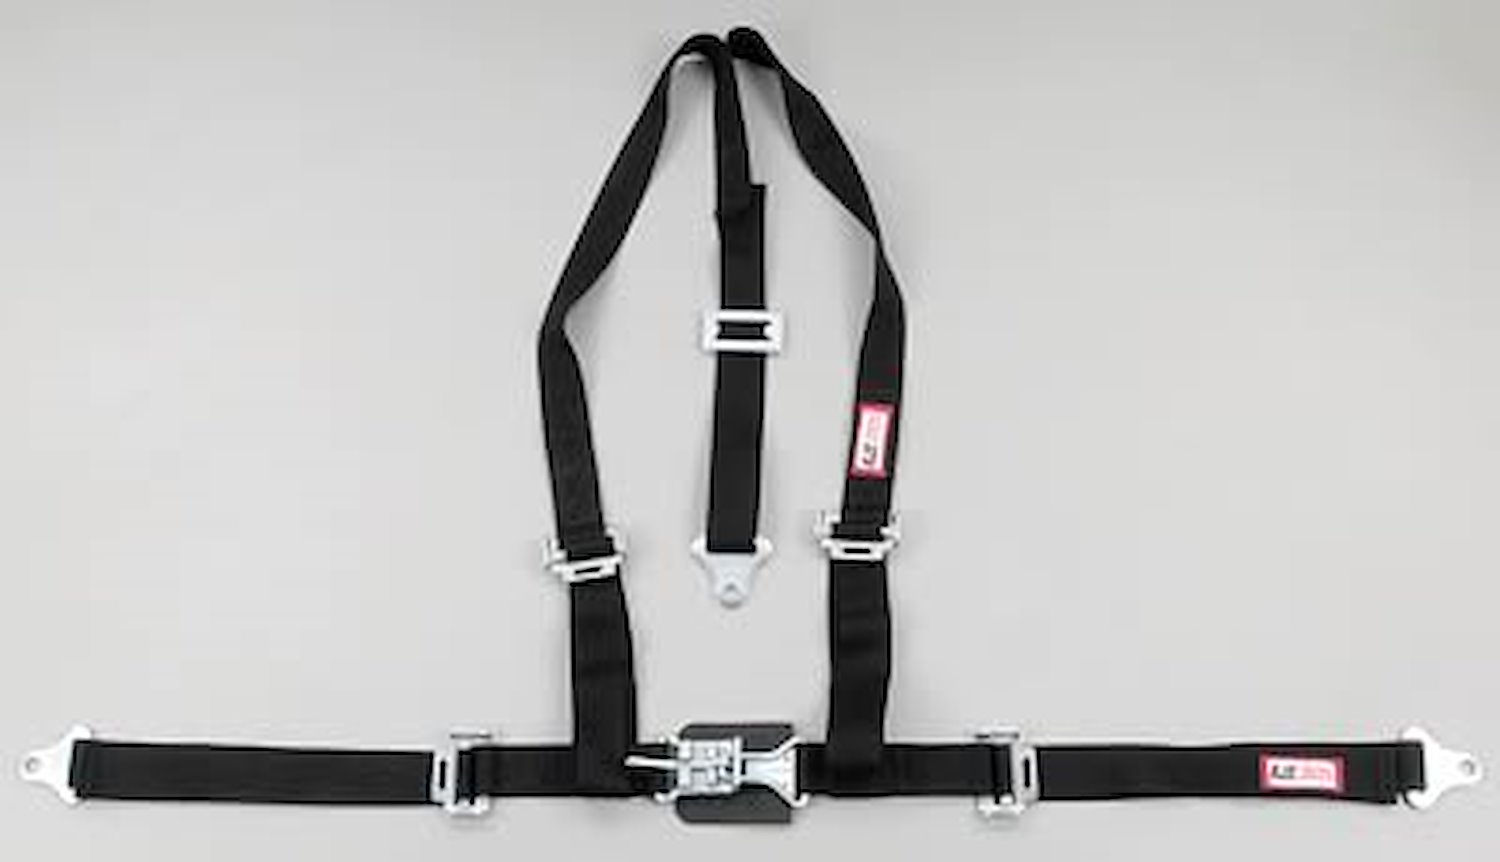 NON-SFI L&L HARNESS 2 PULL UP Lap Belt SNAP SEWN IN 2 S.H. INDIVIDUAL FLOOR Mount w/STERNUM STRAP WRAP/SNAP PURPLE